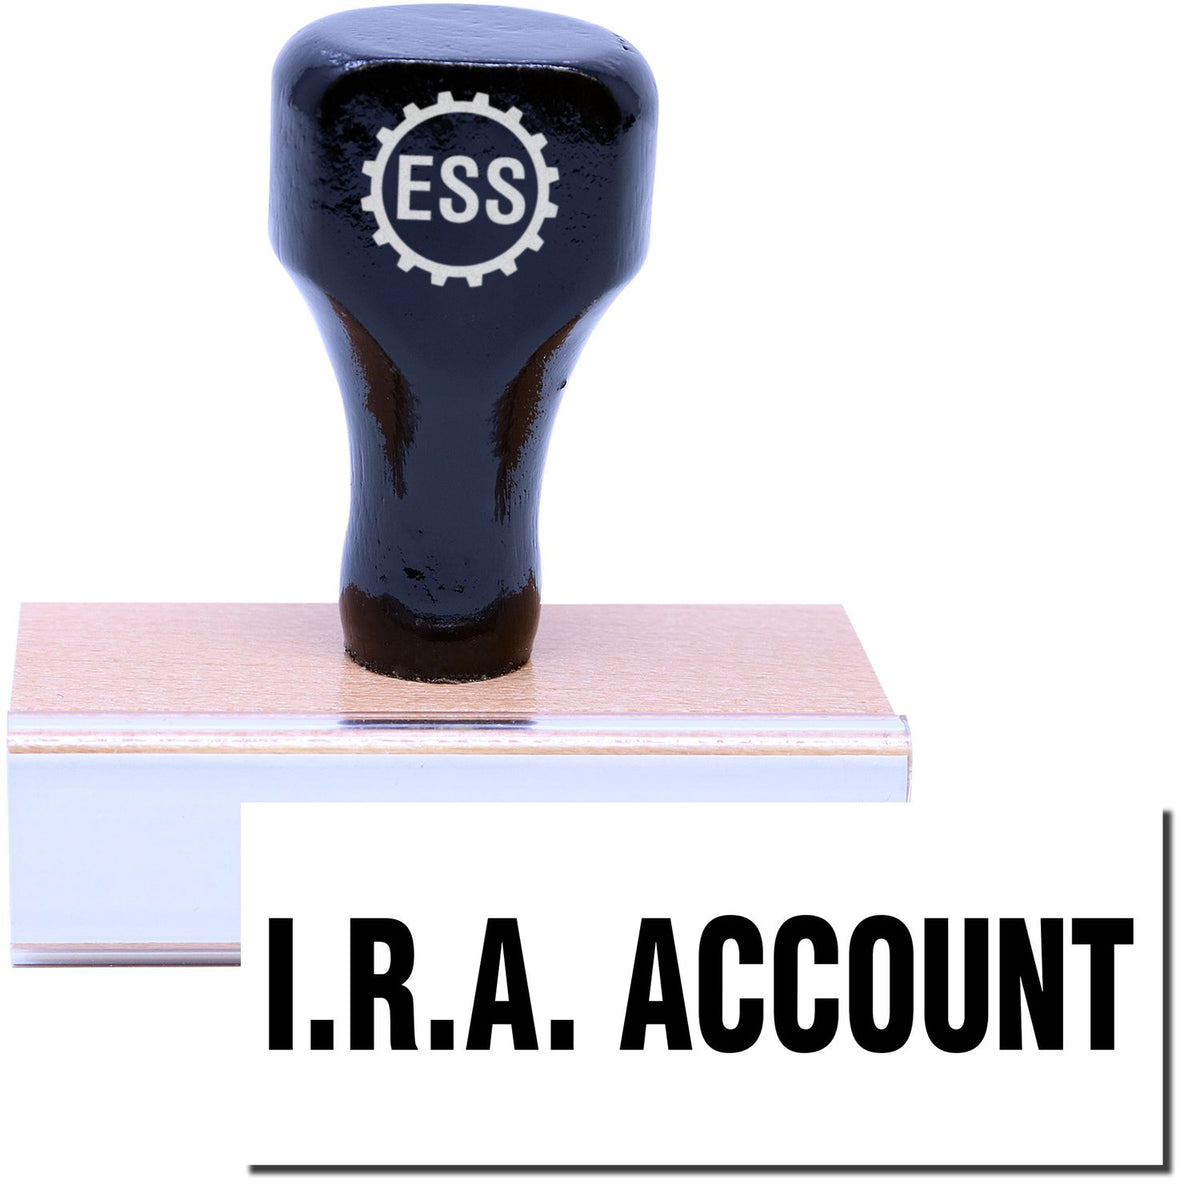 A stock office rubber stamp with a stamped image showing how the text &quot;I.R.A. ACCOUNT&quot; in a large font is displayed after stamping.